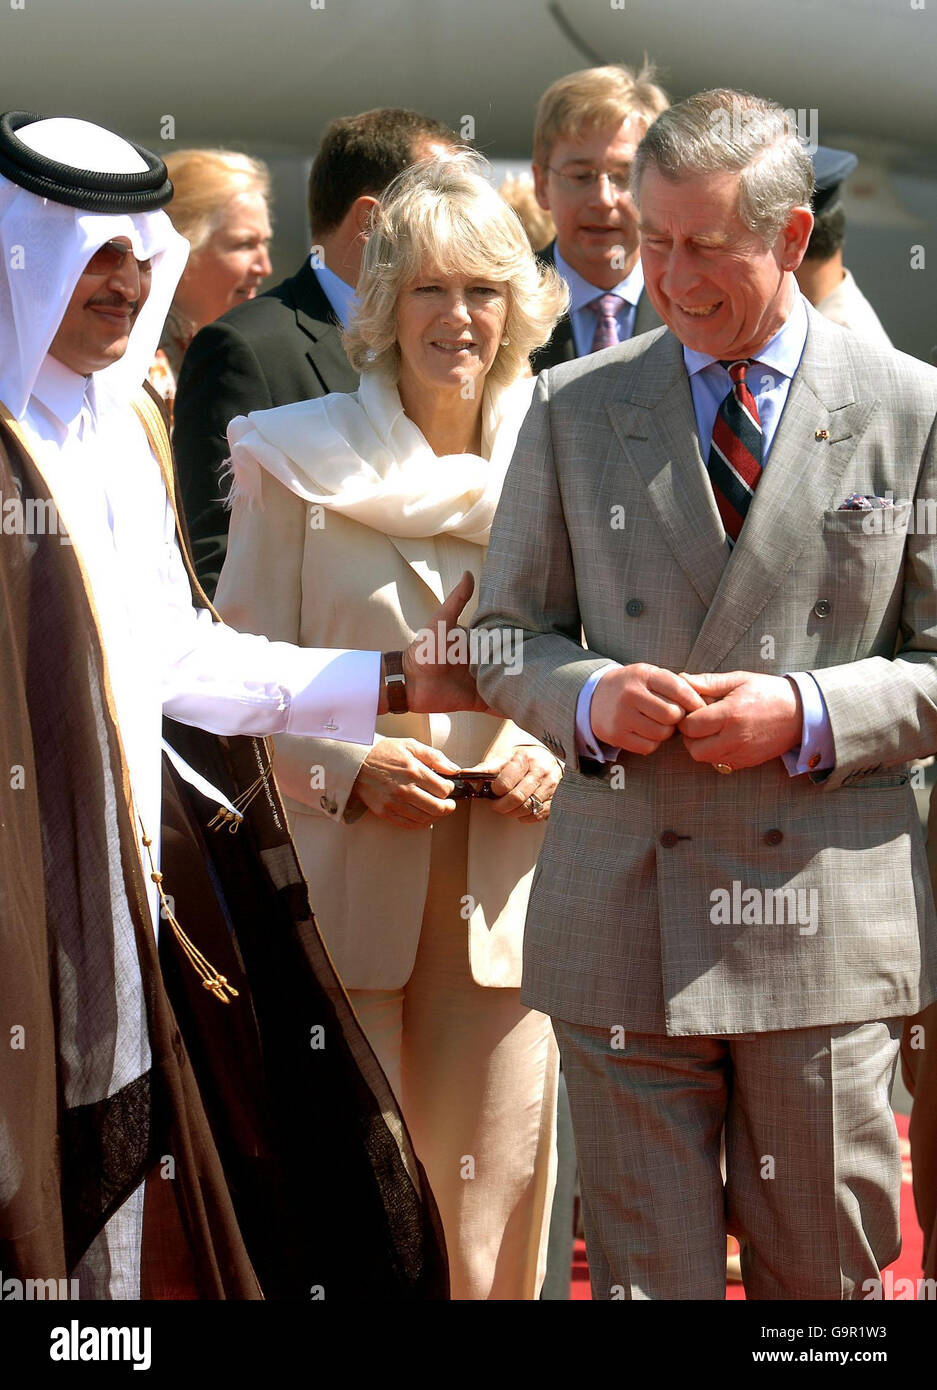 The Prince of Wales walks with Sheikh Hamad Bin Suhaim (left) the Minister of State for ruling family affairs, with the Duchess of Cornwall behind them, after arriving in the Gulf State of Qatar, this morning. Stock Photo